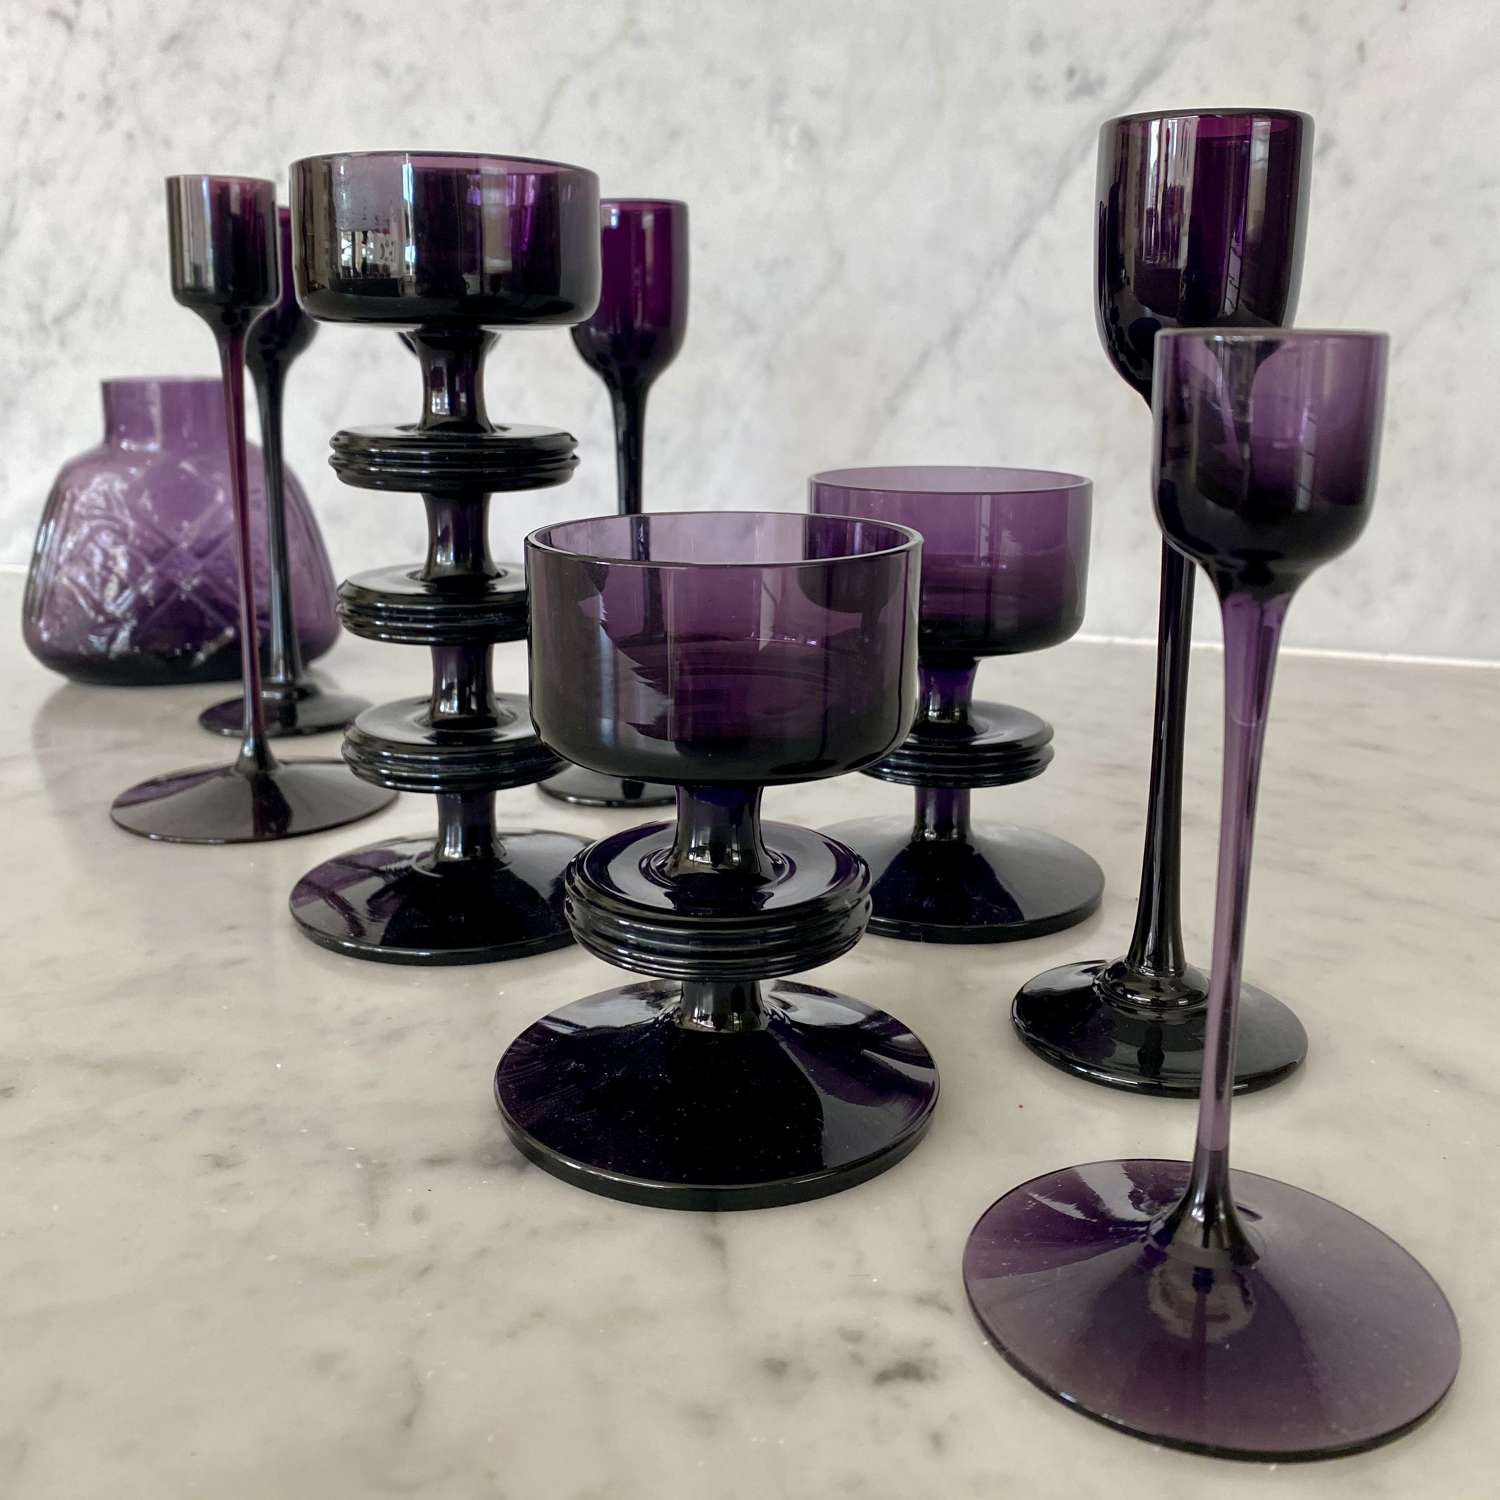 Matched set of 1970s purple glass candlesticks and vase